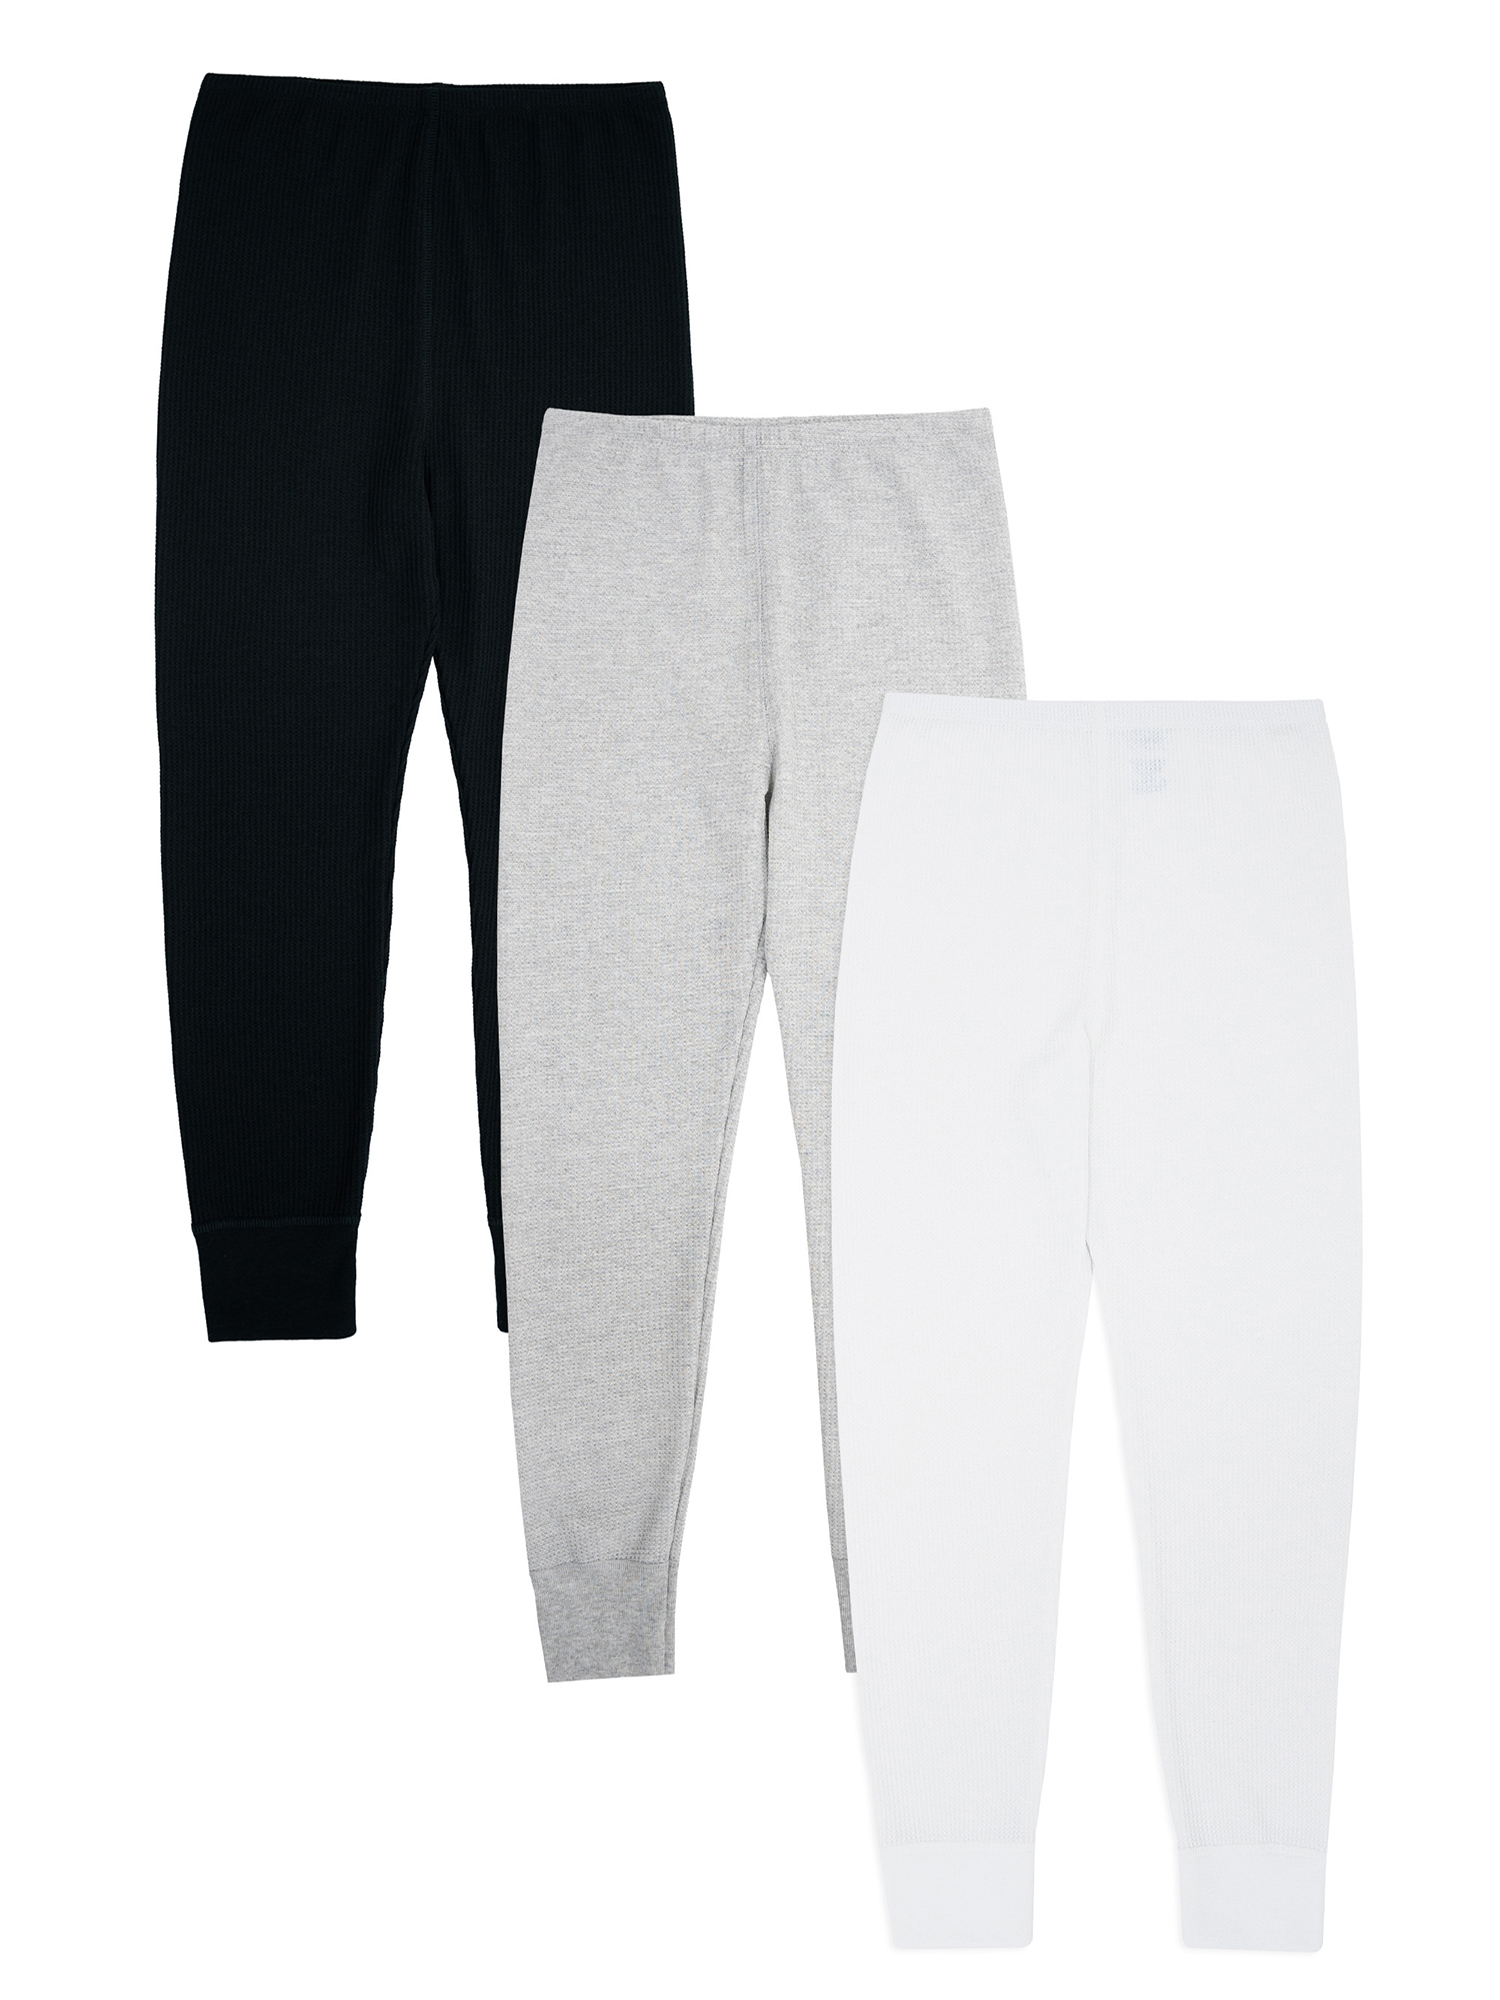 Fruit of the Loom Boy's & Girl's Waffle Thermal Bottoms, 3-Pack Set, Sizes 4-18 - image 1 of 10